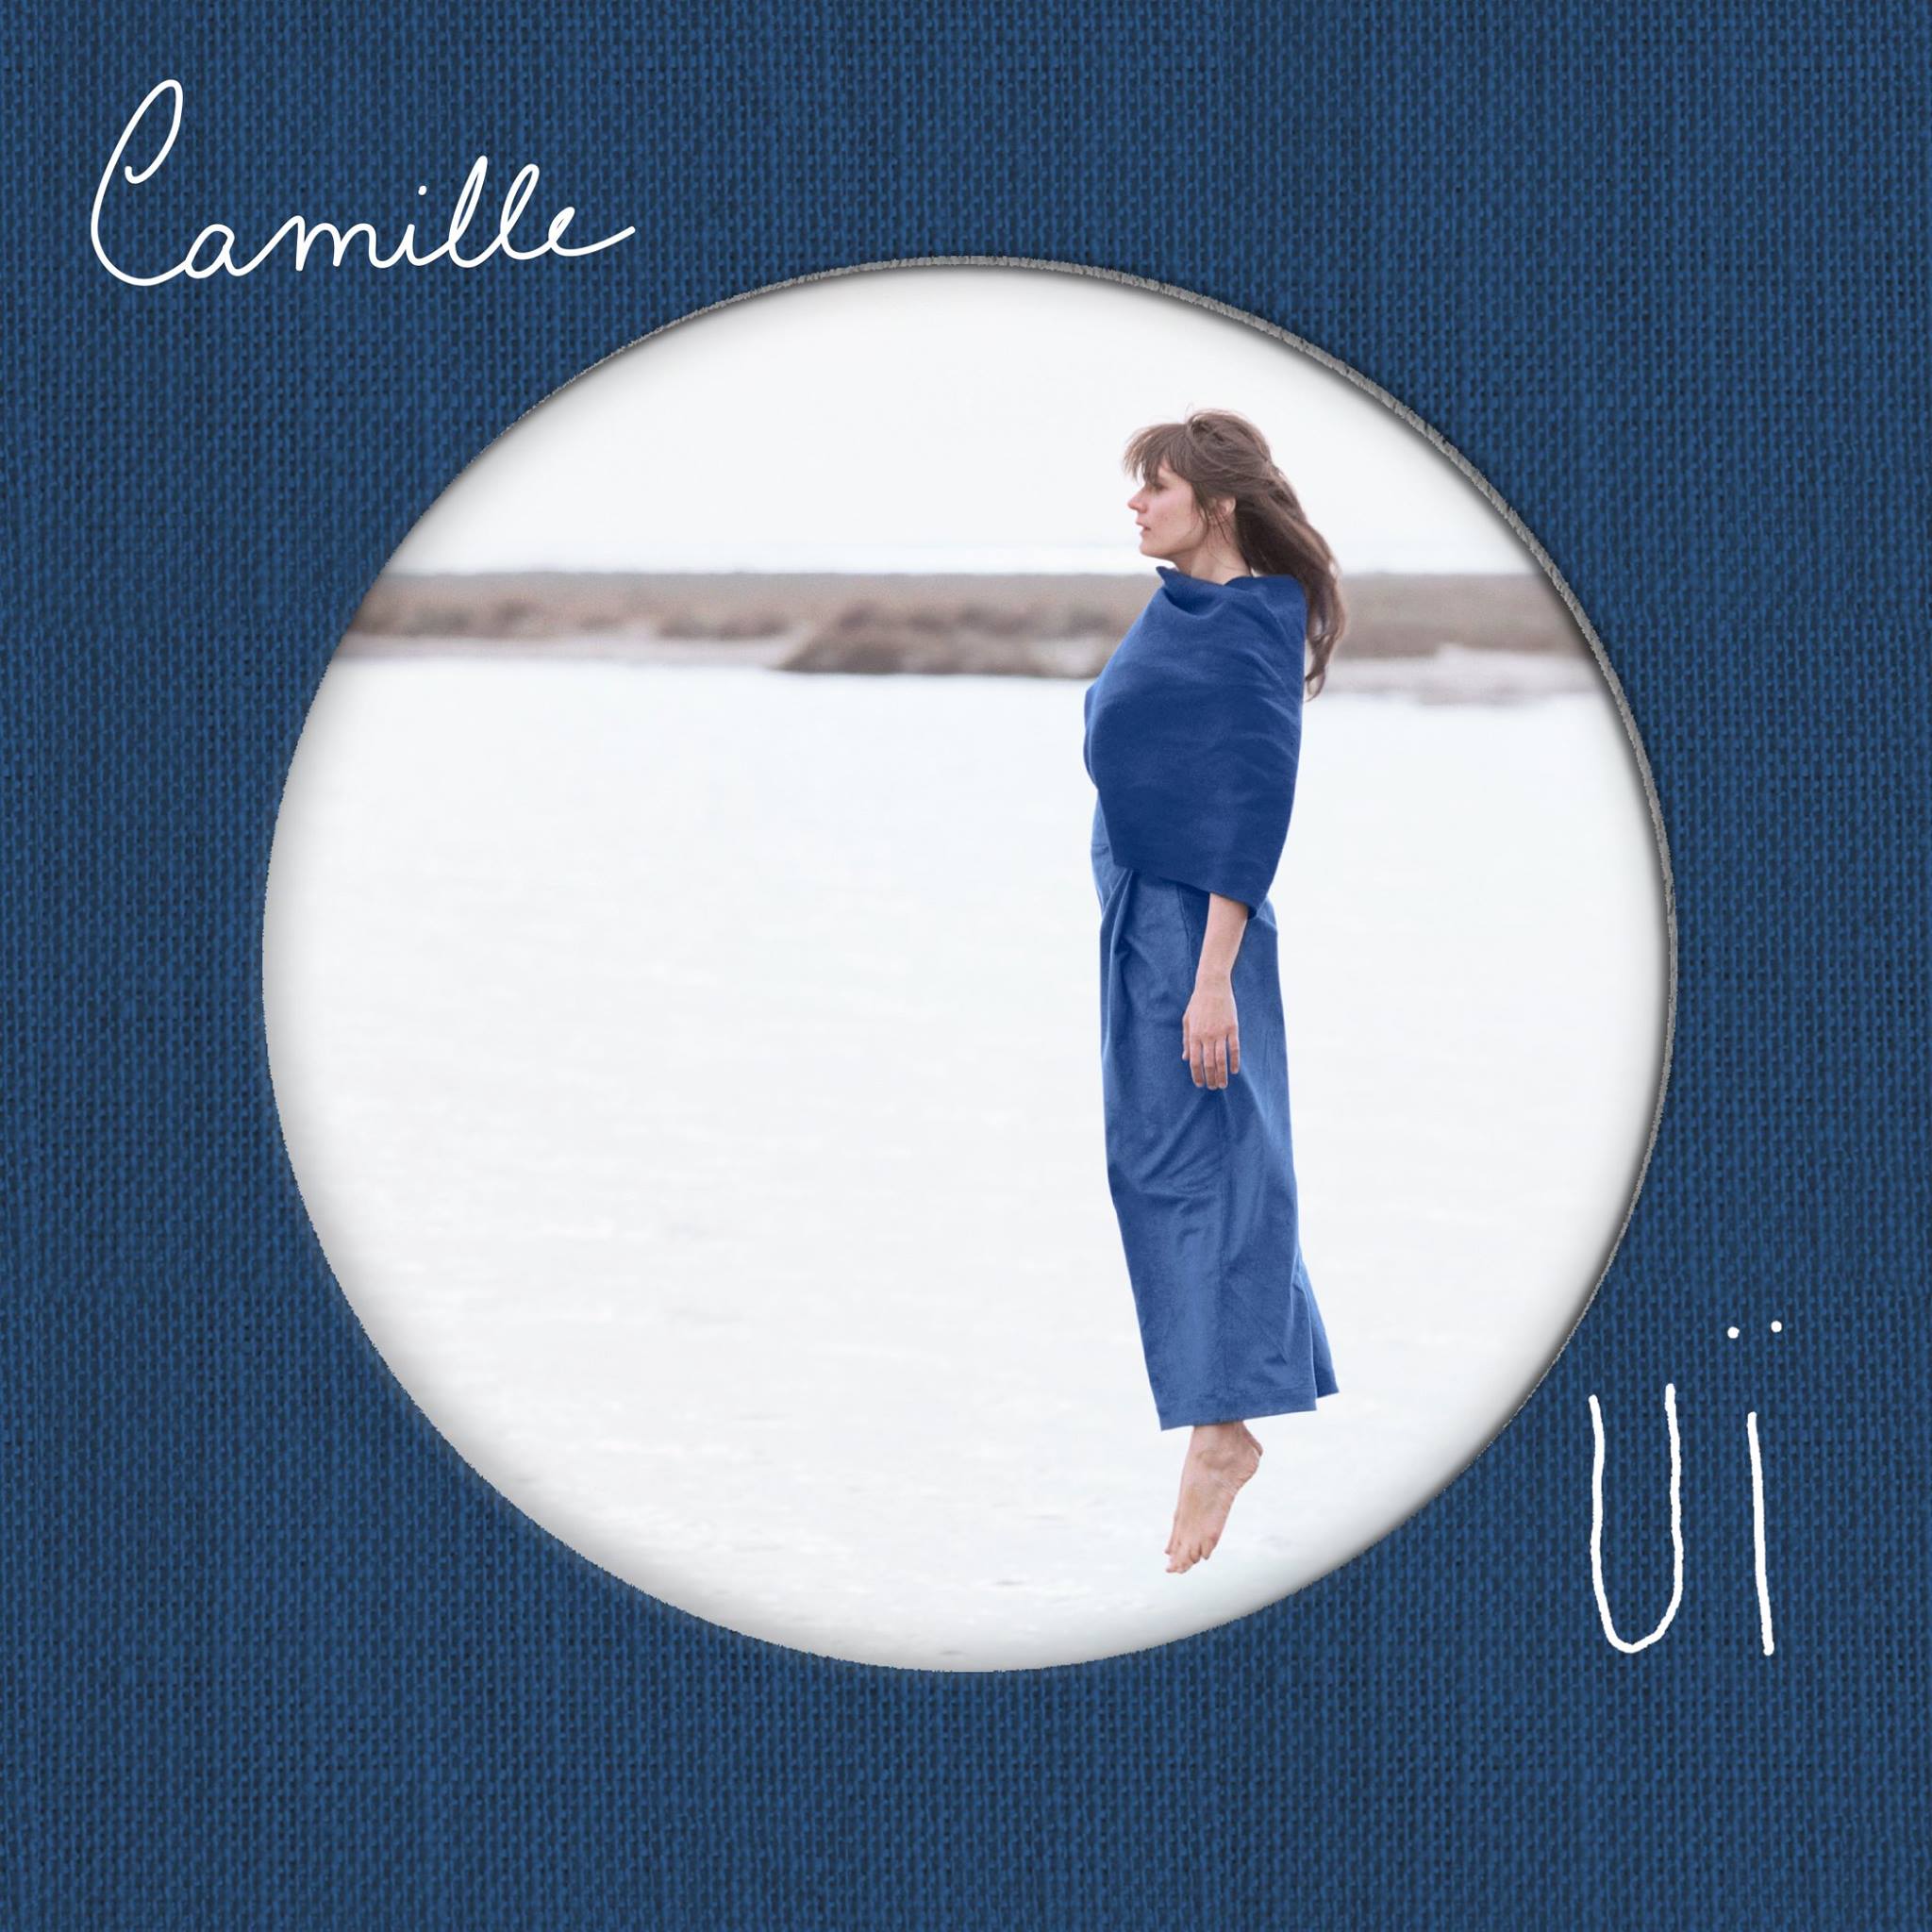 Camille, OUÏ (Because)